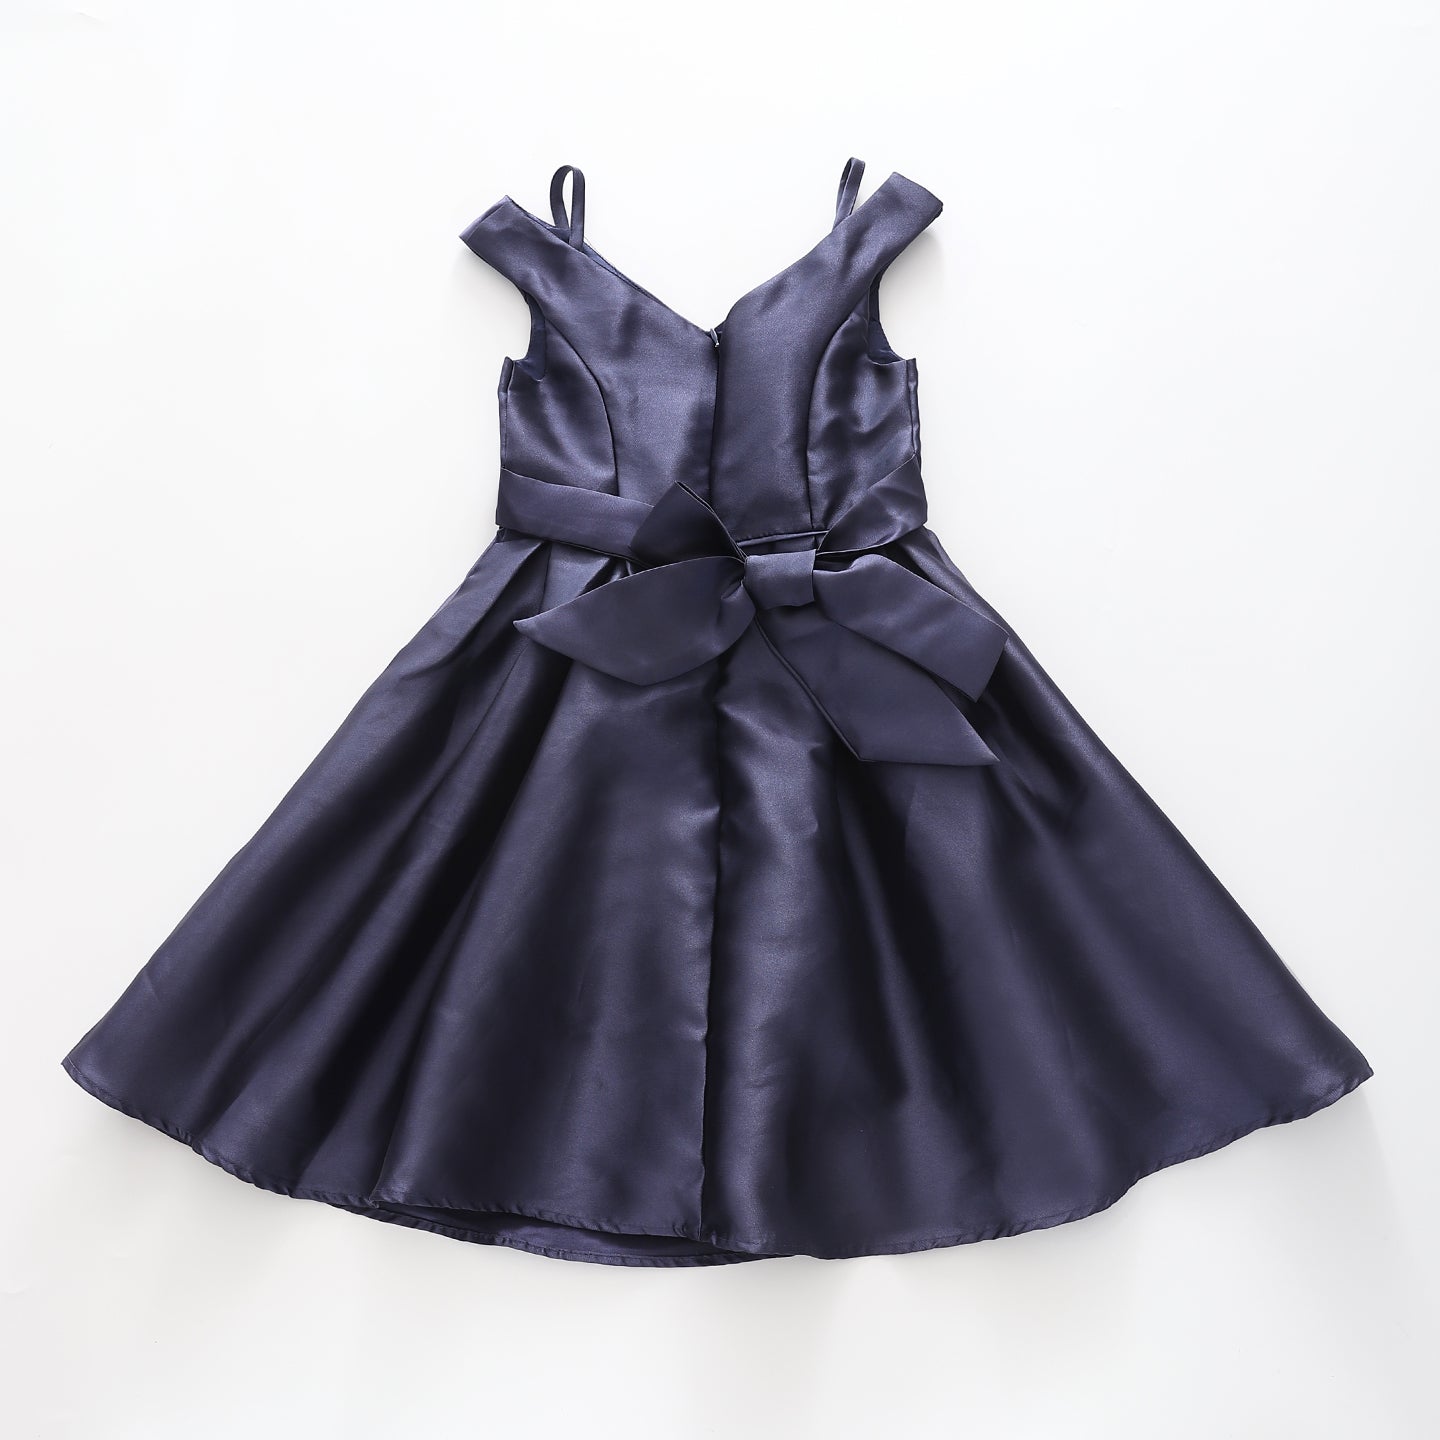 Girl's Navy Blue Party Dress